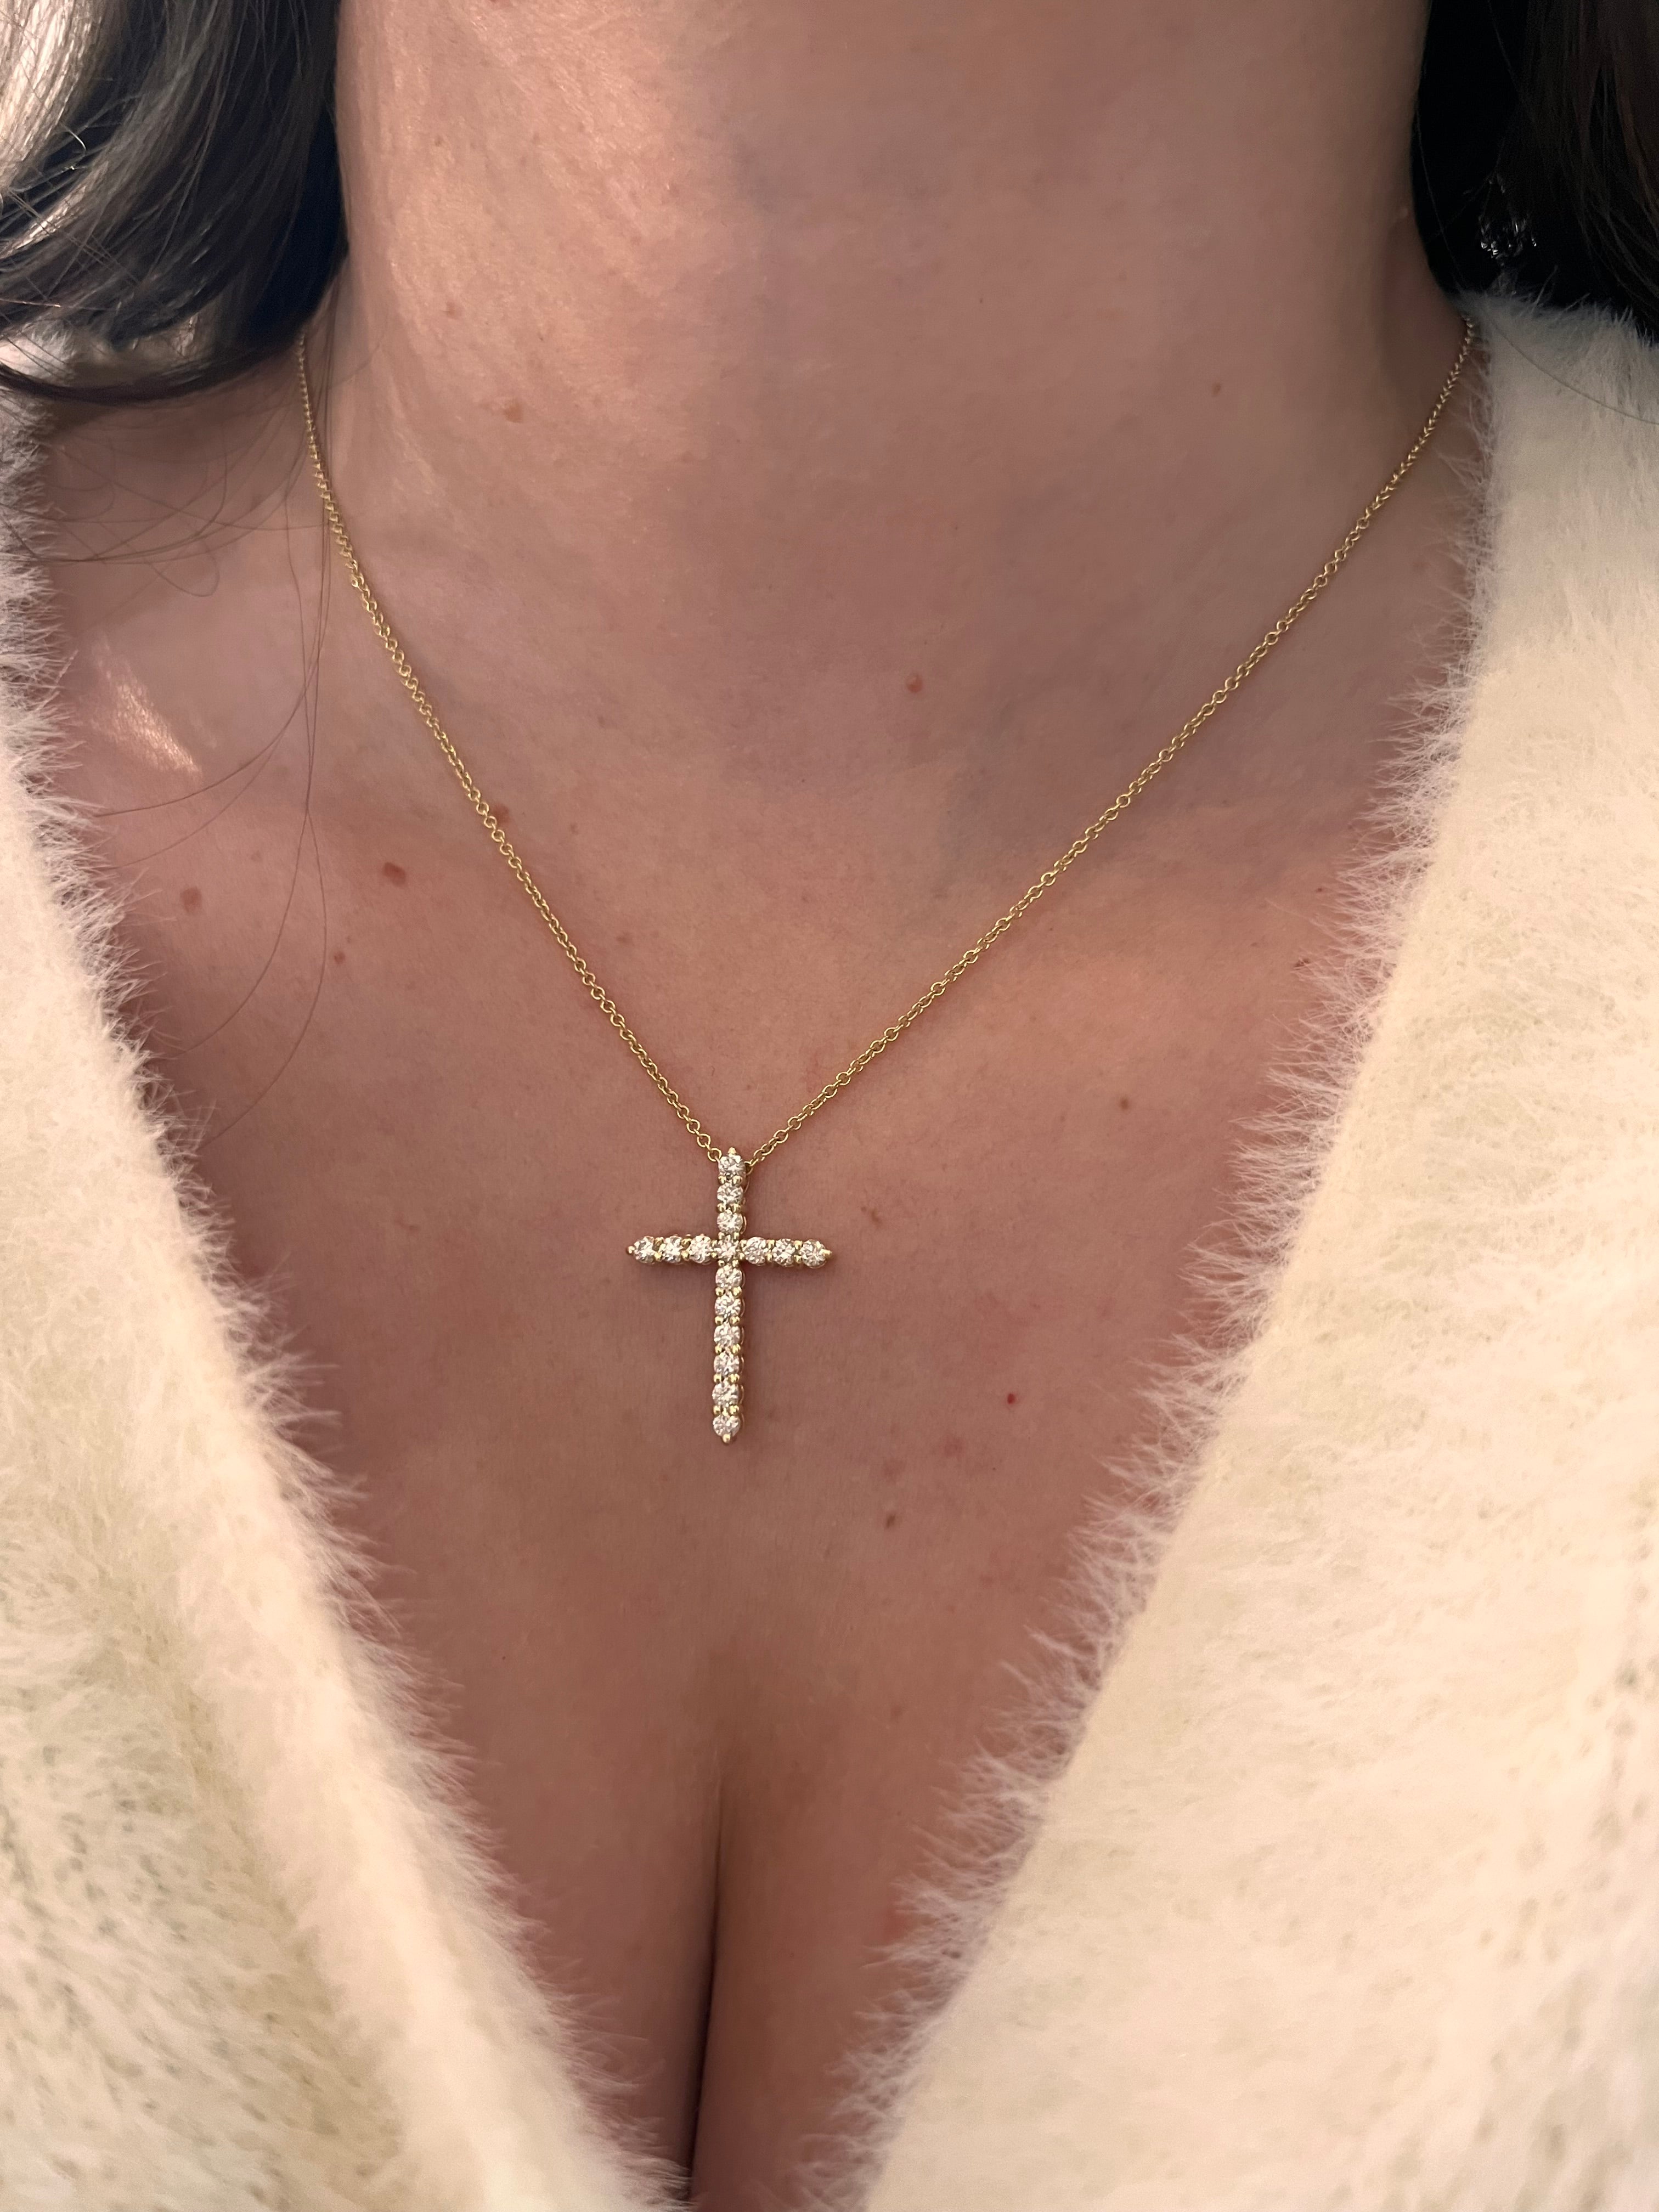 WD1320 Yellow Gold and Diamond Cross Necklace